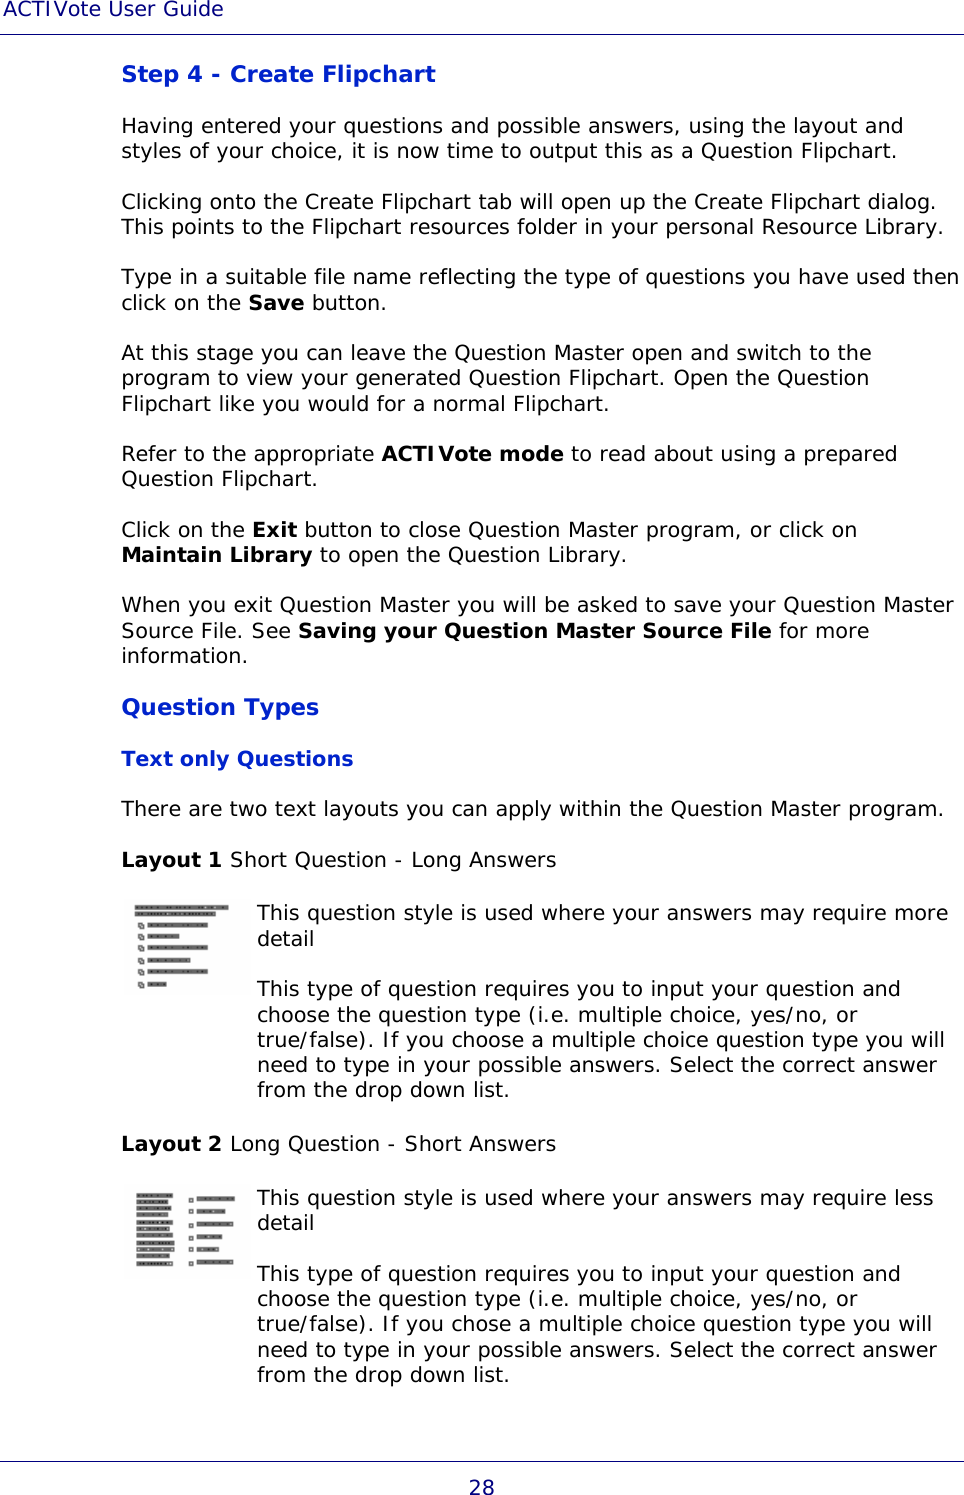 ACTIVote User Guide 28 Step 4 - Create Flipchart Having entered your questions and possible answers, using the layout and styles of your choice, it is now time to output this as a Question Flipchart. Clicking onto the Create Flipchart tab will open up the Create Flipchart dialog. This points to the Flipchart resources folder in your personal Resource Library. Type in a suitable file name reflecting the type of questions you have used then click on the Save button. At this stage you can leave the Question Master open and switch to the program to view your generated Question Flipchart. Open the Question Flipchart like you would for a normal Flipchart. Refer to the appropriate ACTIVote mode to read about using a prepared Question Flipchart. Click on the Exit button to close Question Master program, or click on Maintain Library to open the Question Library. When you exit Question Master you will be asked to save your Question Master Source File. See Saving your Question Master Source File for more information. Question Types Text only Questions There are two text layouts you can apply within the Question Master program. Layout 1 Short Question - Long Answers  This question style is used where your answers may require more detail This type of question requires you to input your question and choose the question type (i.e. multiple choice, yes/no, or true/false). If you choose a multiple choice question type you will need to type in your possible answers. Select the correct answer from the drop down list. Layout 2 Long Question - Short Answers  This question style is used where your answers may require less detail This type of question requires you to input your question and choose the question type (i.e. multiple choice, yes/no, or true/false). If you chose a multiple choice question type you will need to type in your possible answers. Select the correct answer from the drop down list. 